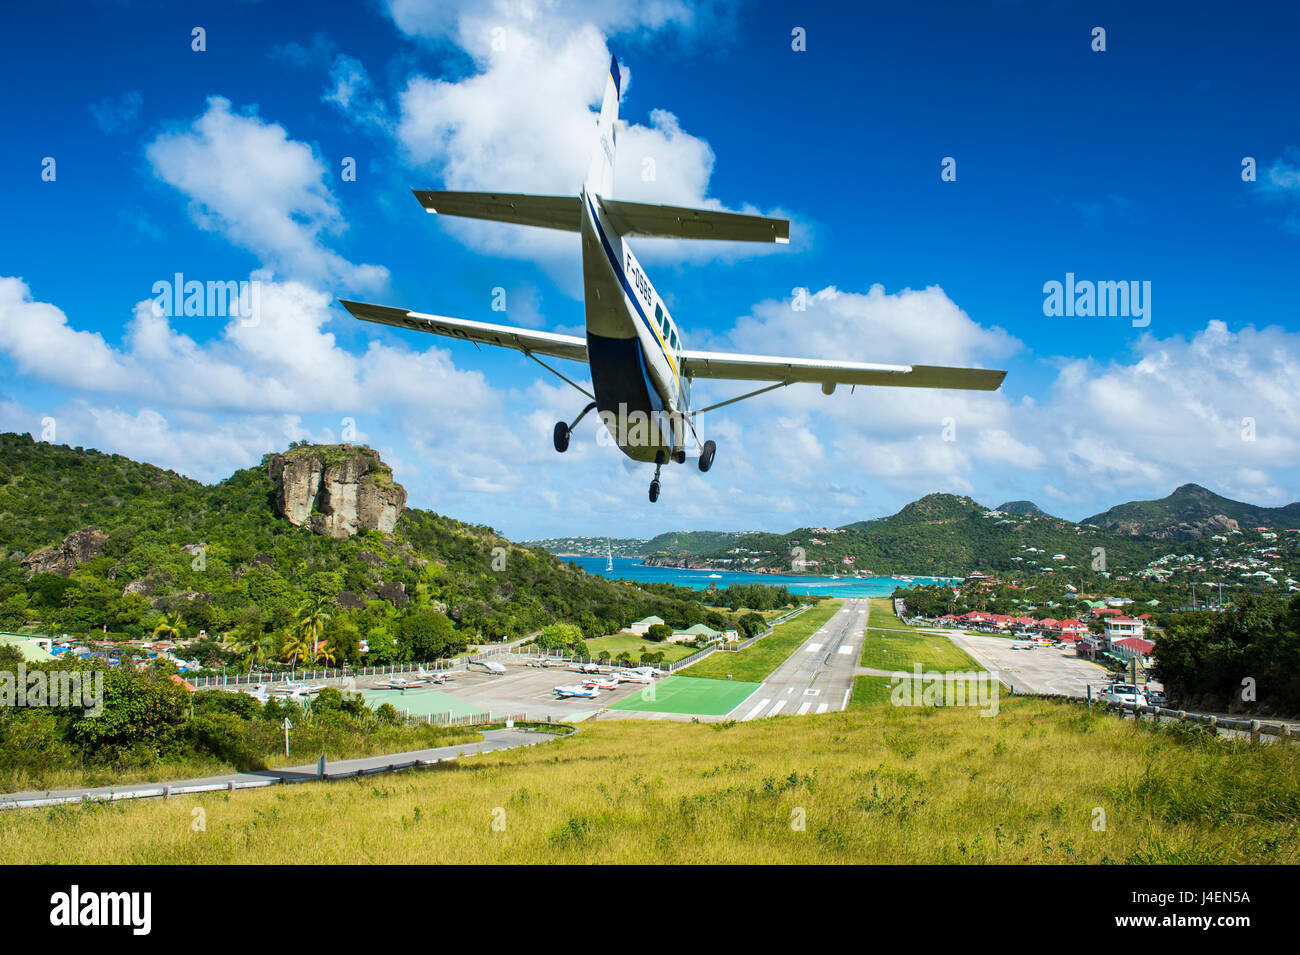 Small airplane landing at the airport of St. Barth (Saint Barthelemy), Lesser Antilles, West Indies, Caribbean, Central America Stock Photo